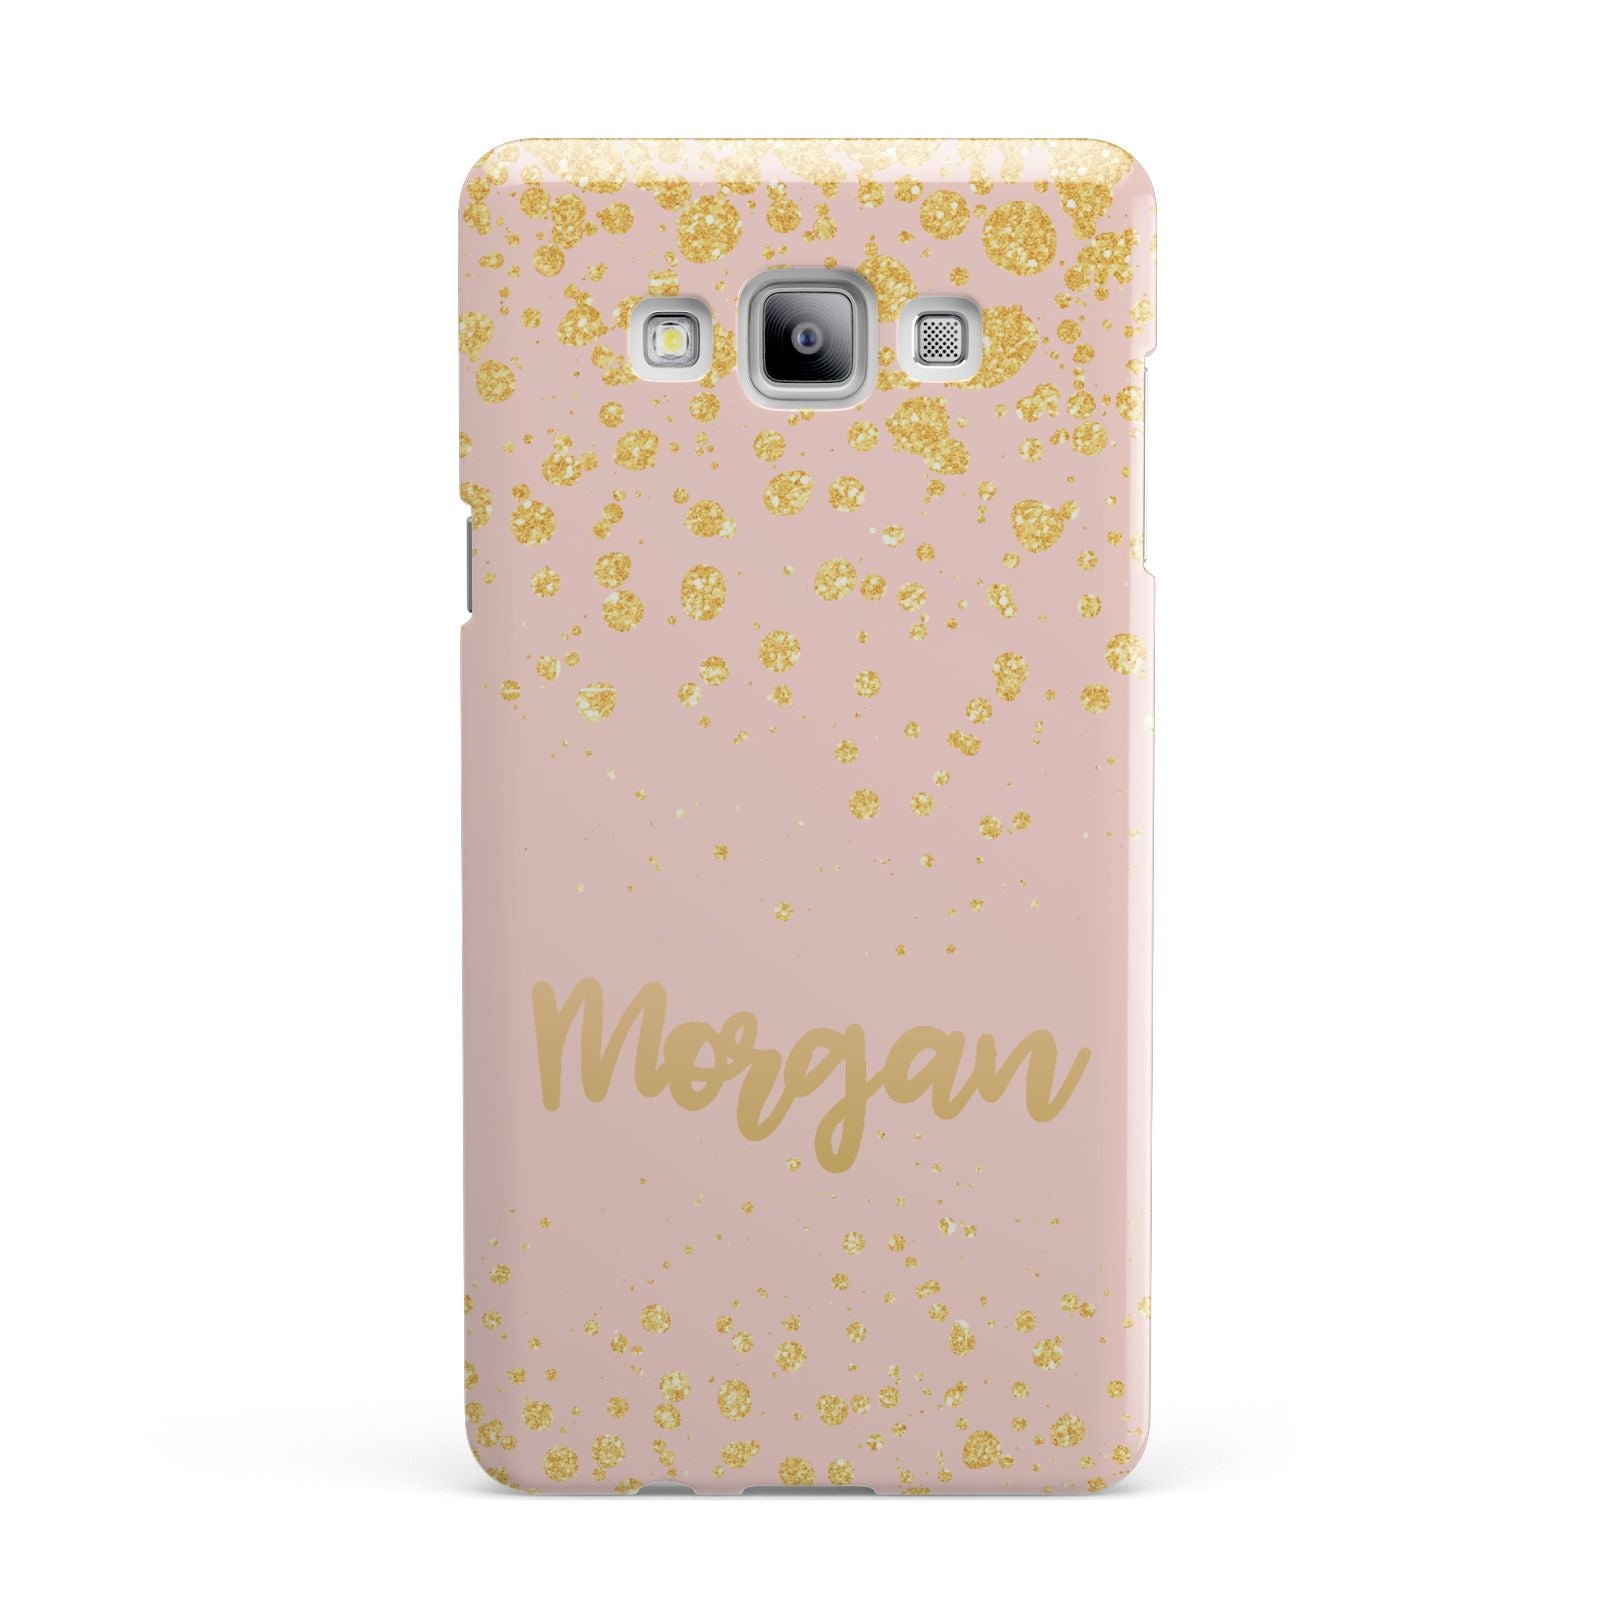 Personalised Pink Gold Splatter With Name Samsung Galaxy A7 2015 Case